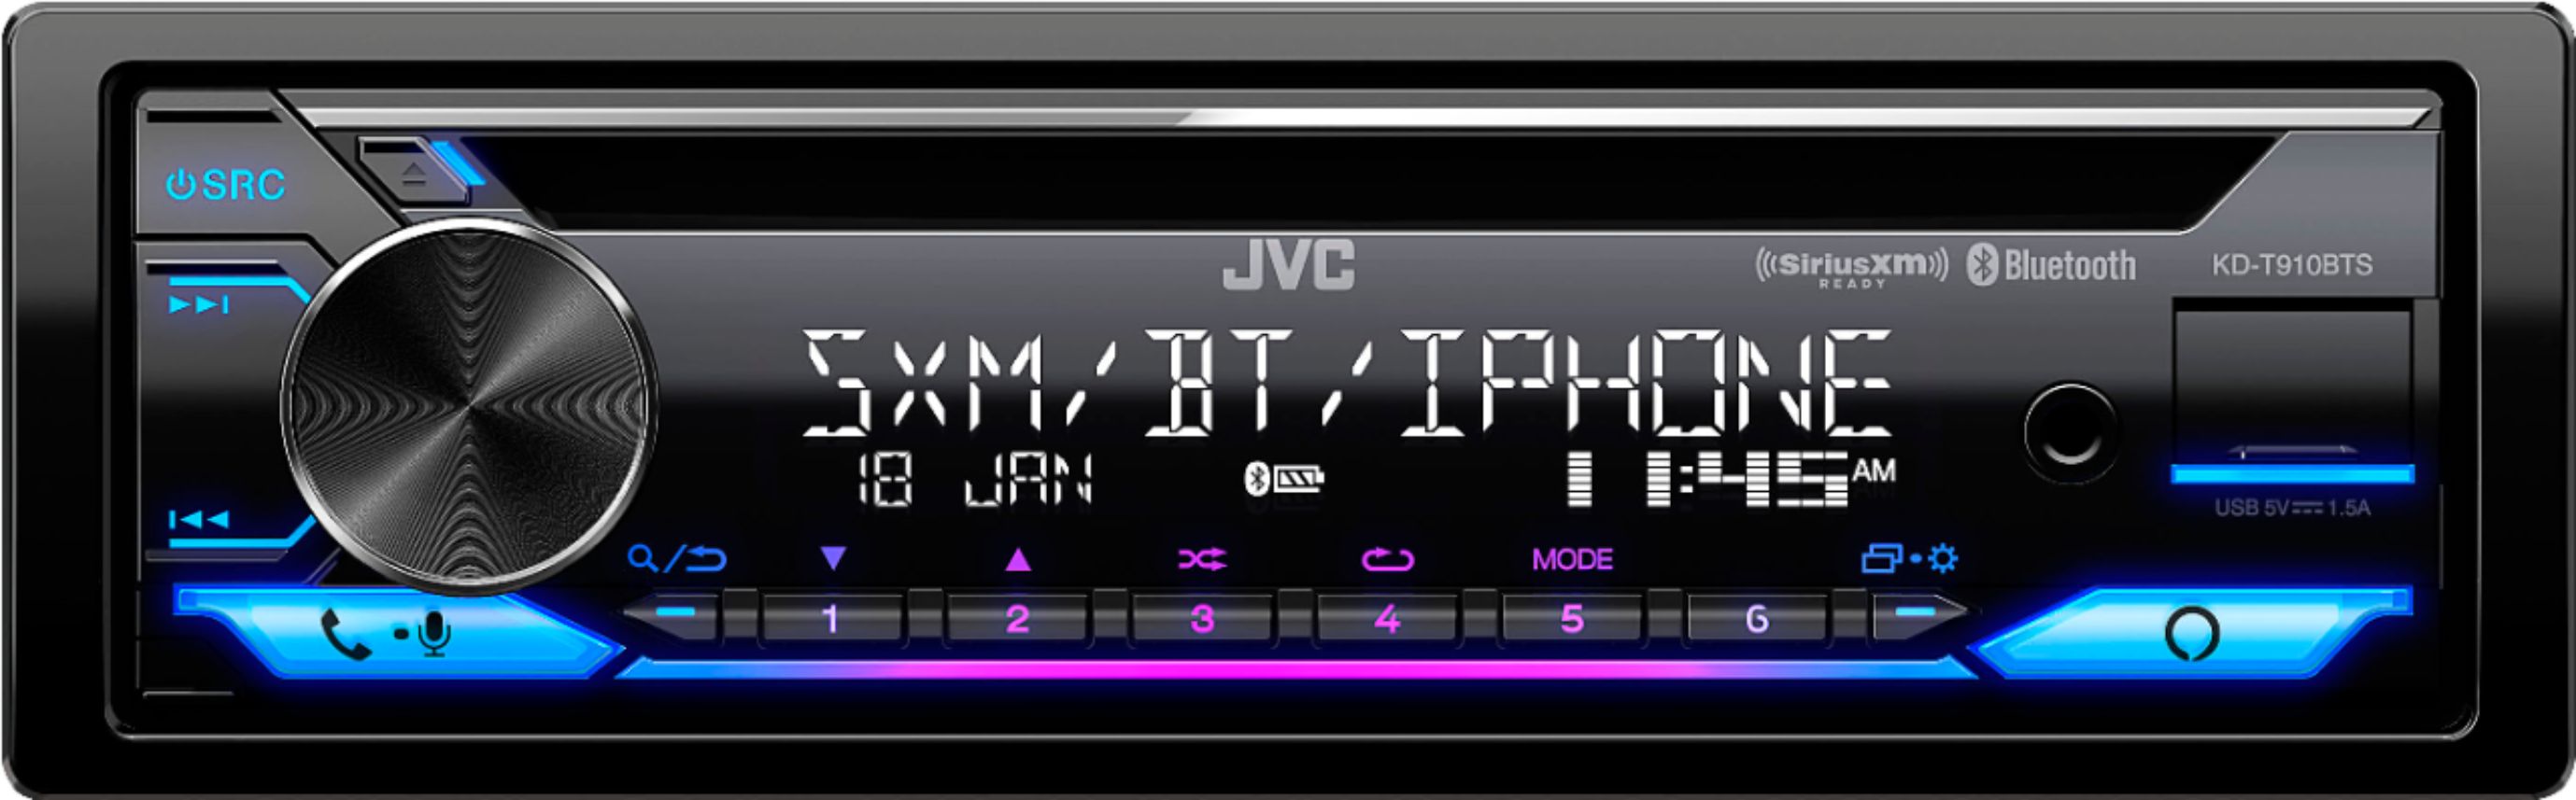 JVC In-Dash CD/DM Receiver Built-in Bluetooth Satellite Radio-ready with Detachable Faceplate Black KD-T910BTS